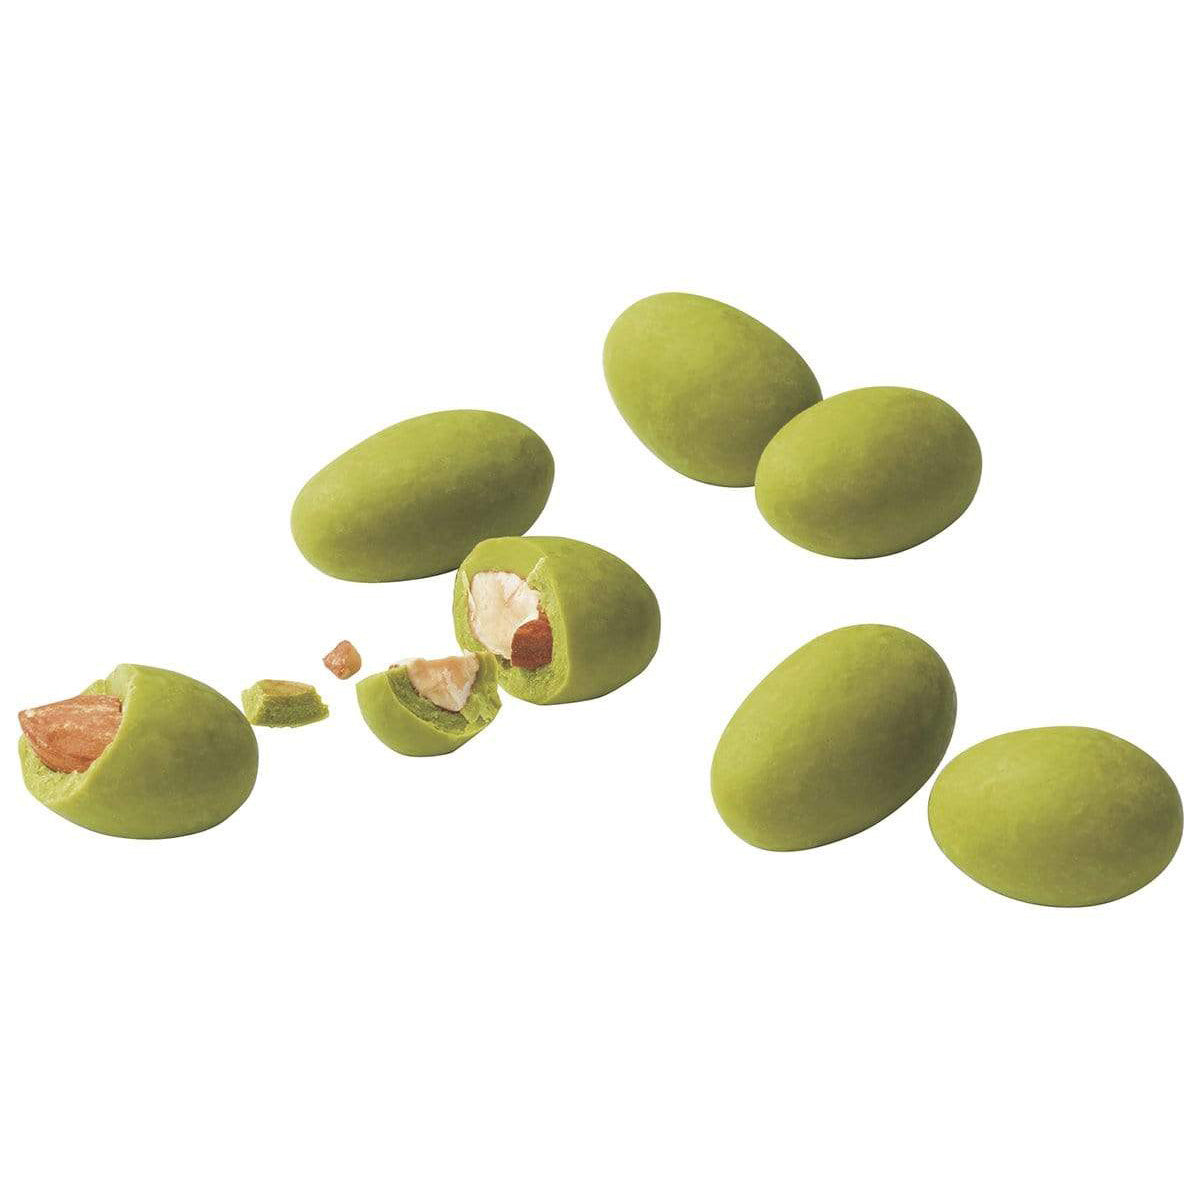 ROYCE' Chocolate - Matcha Almond Chocolate - Image shows round green chocolate-coated almonds on a white surface.